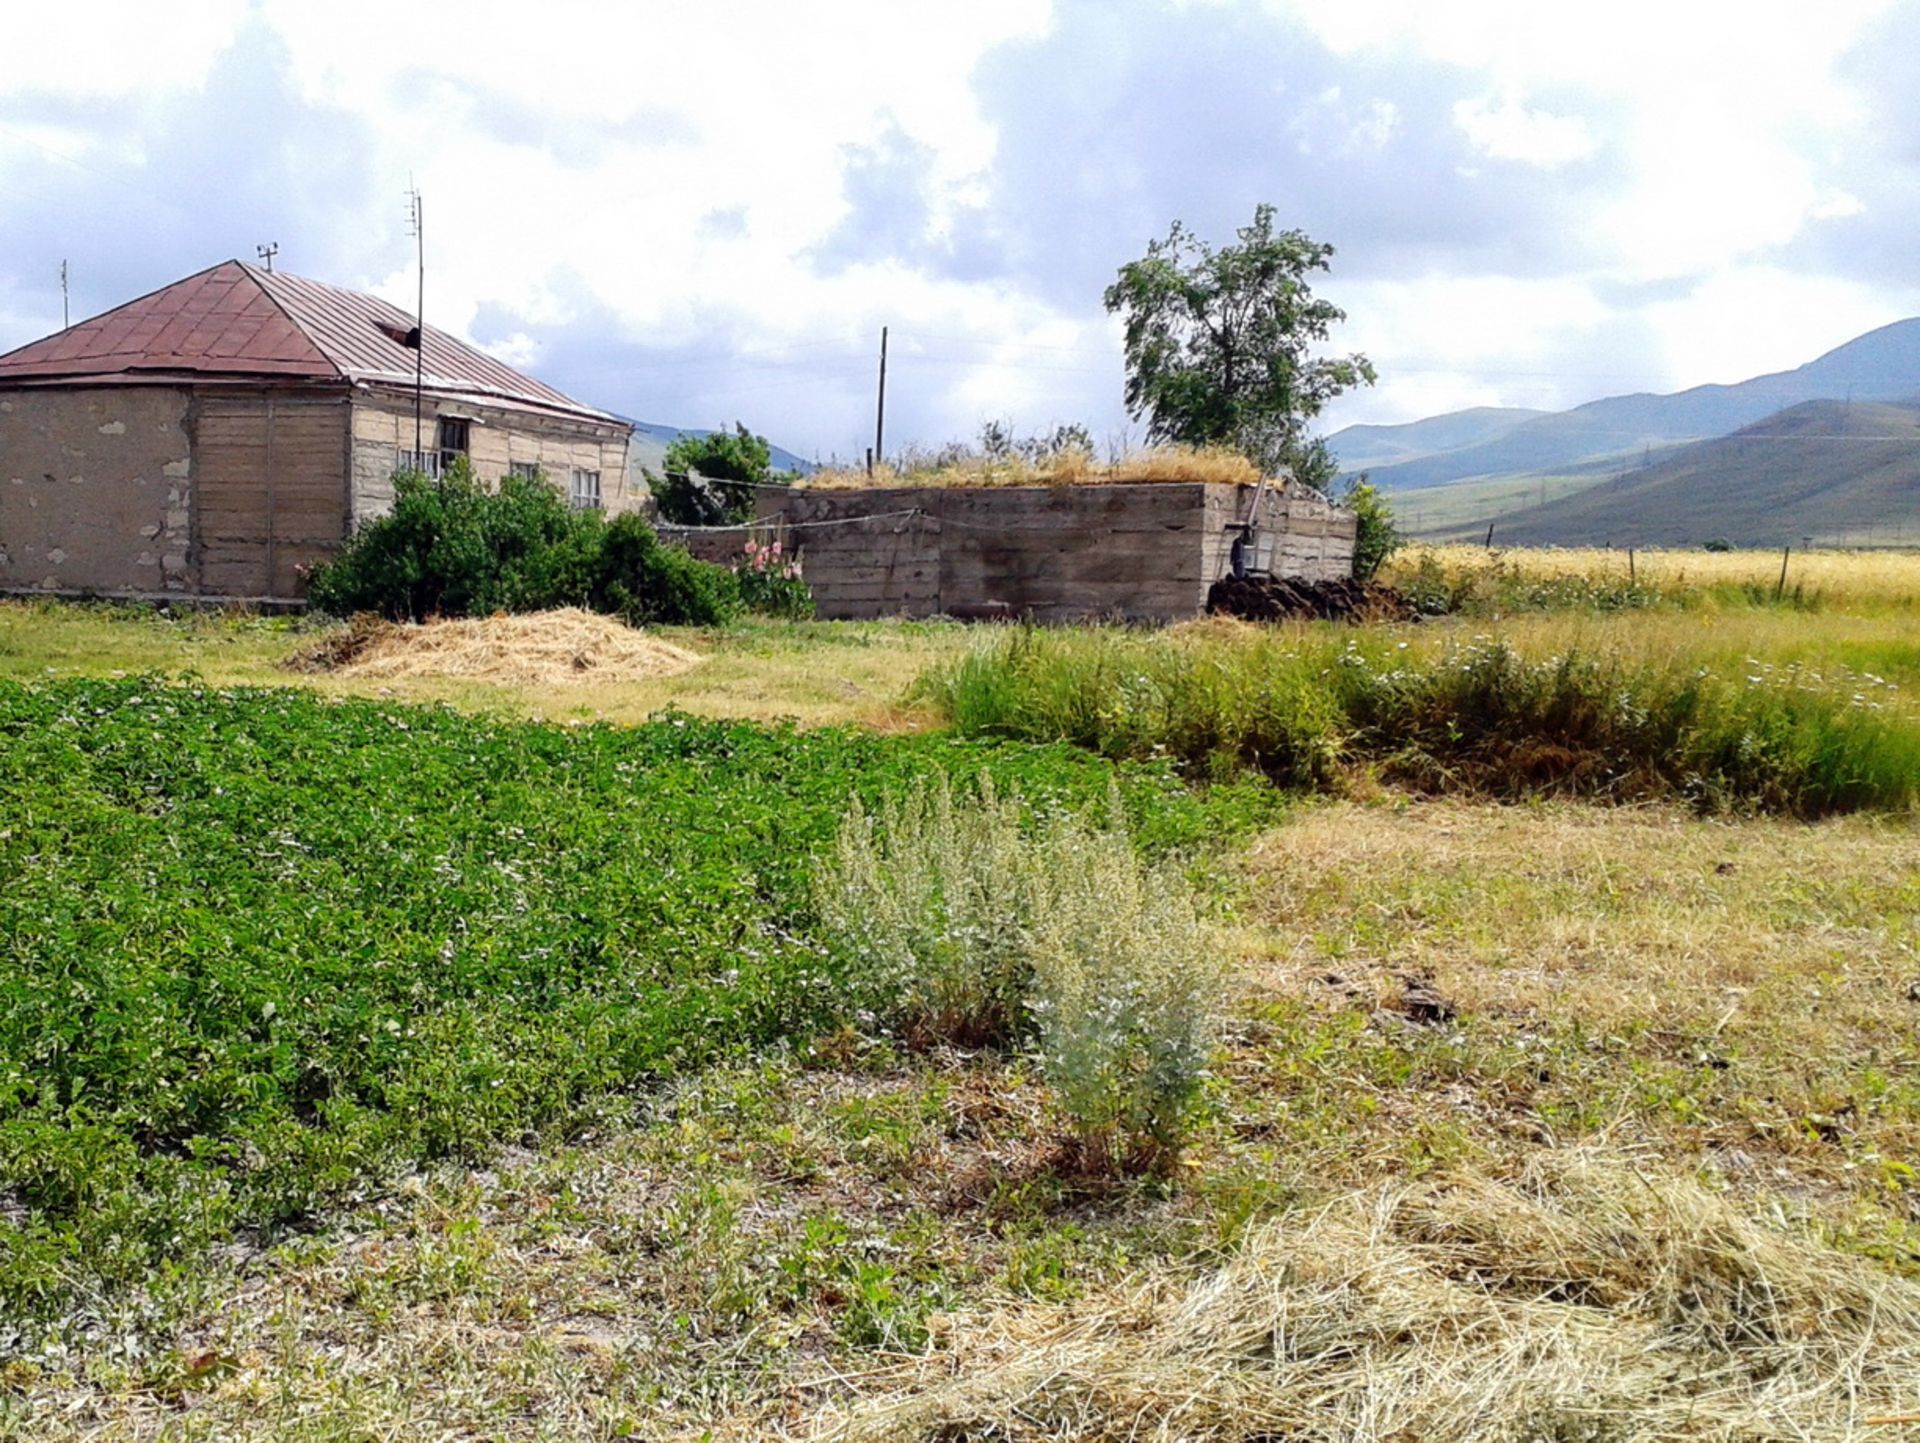 HOUSE IN 1 ACRE IN SOTK, ARMENIA - Image 19 of 35